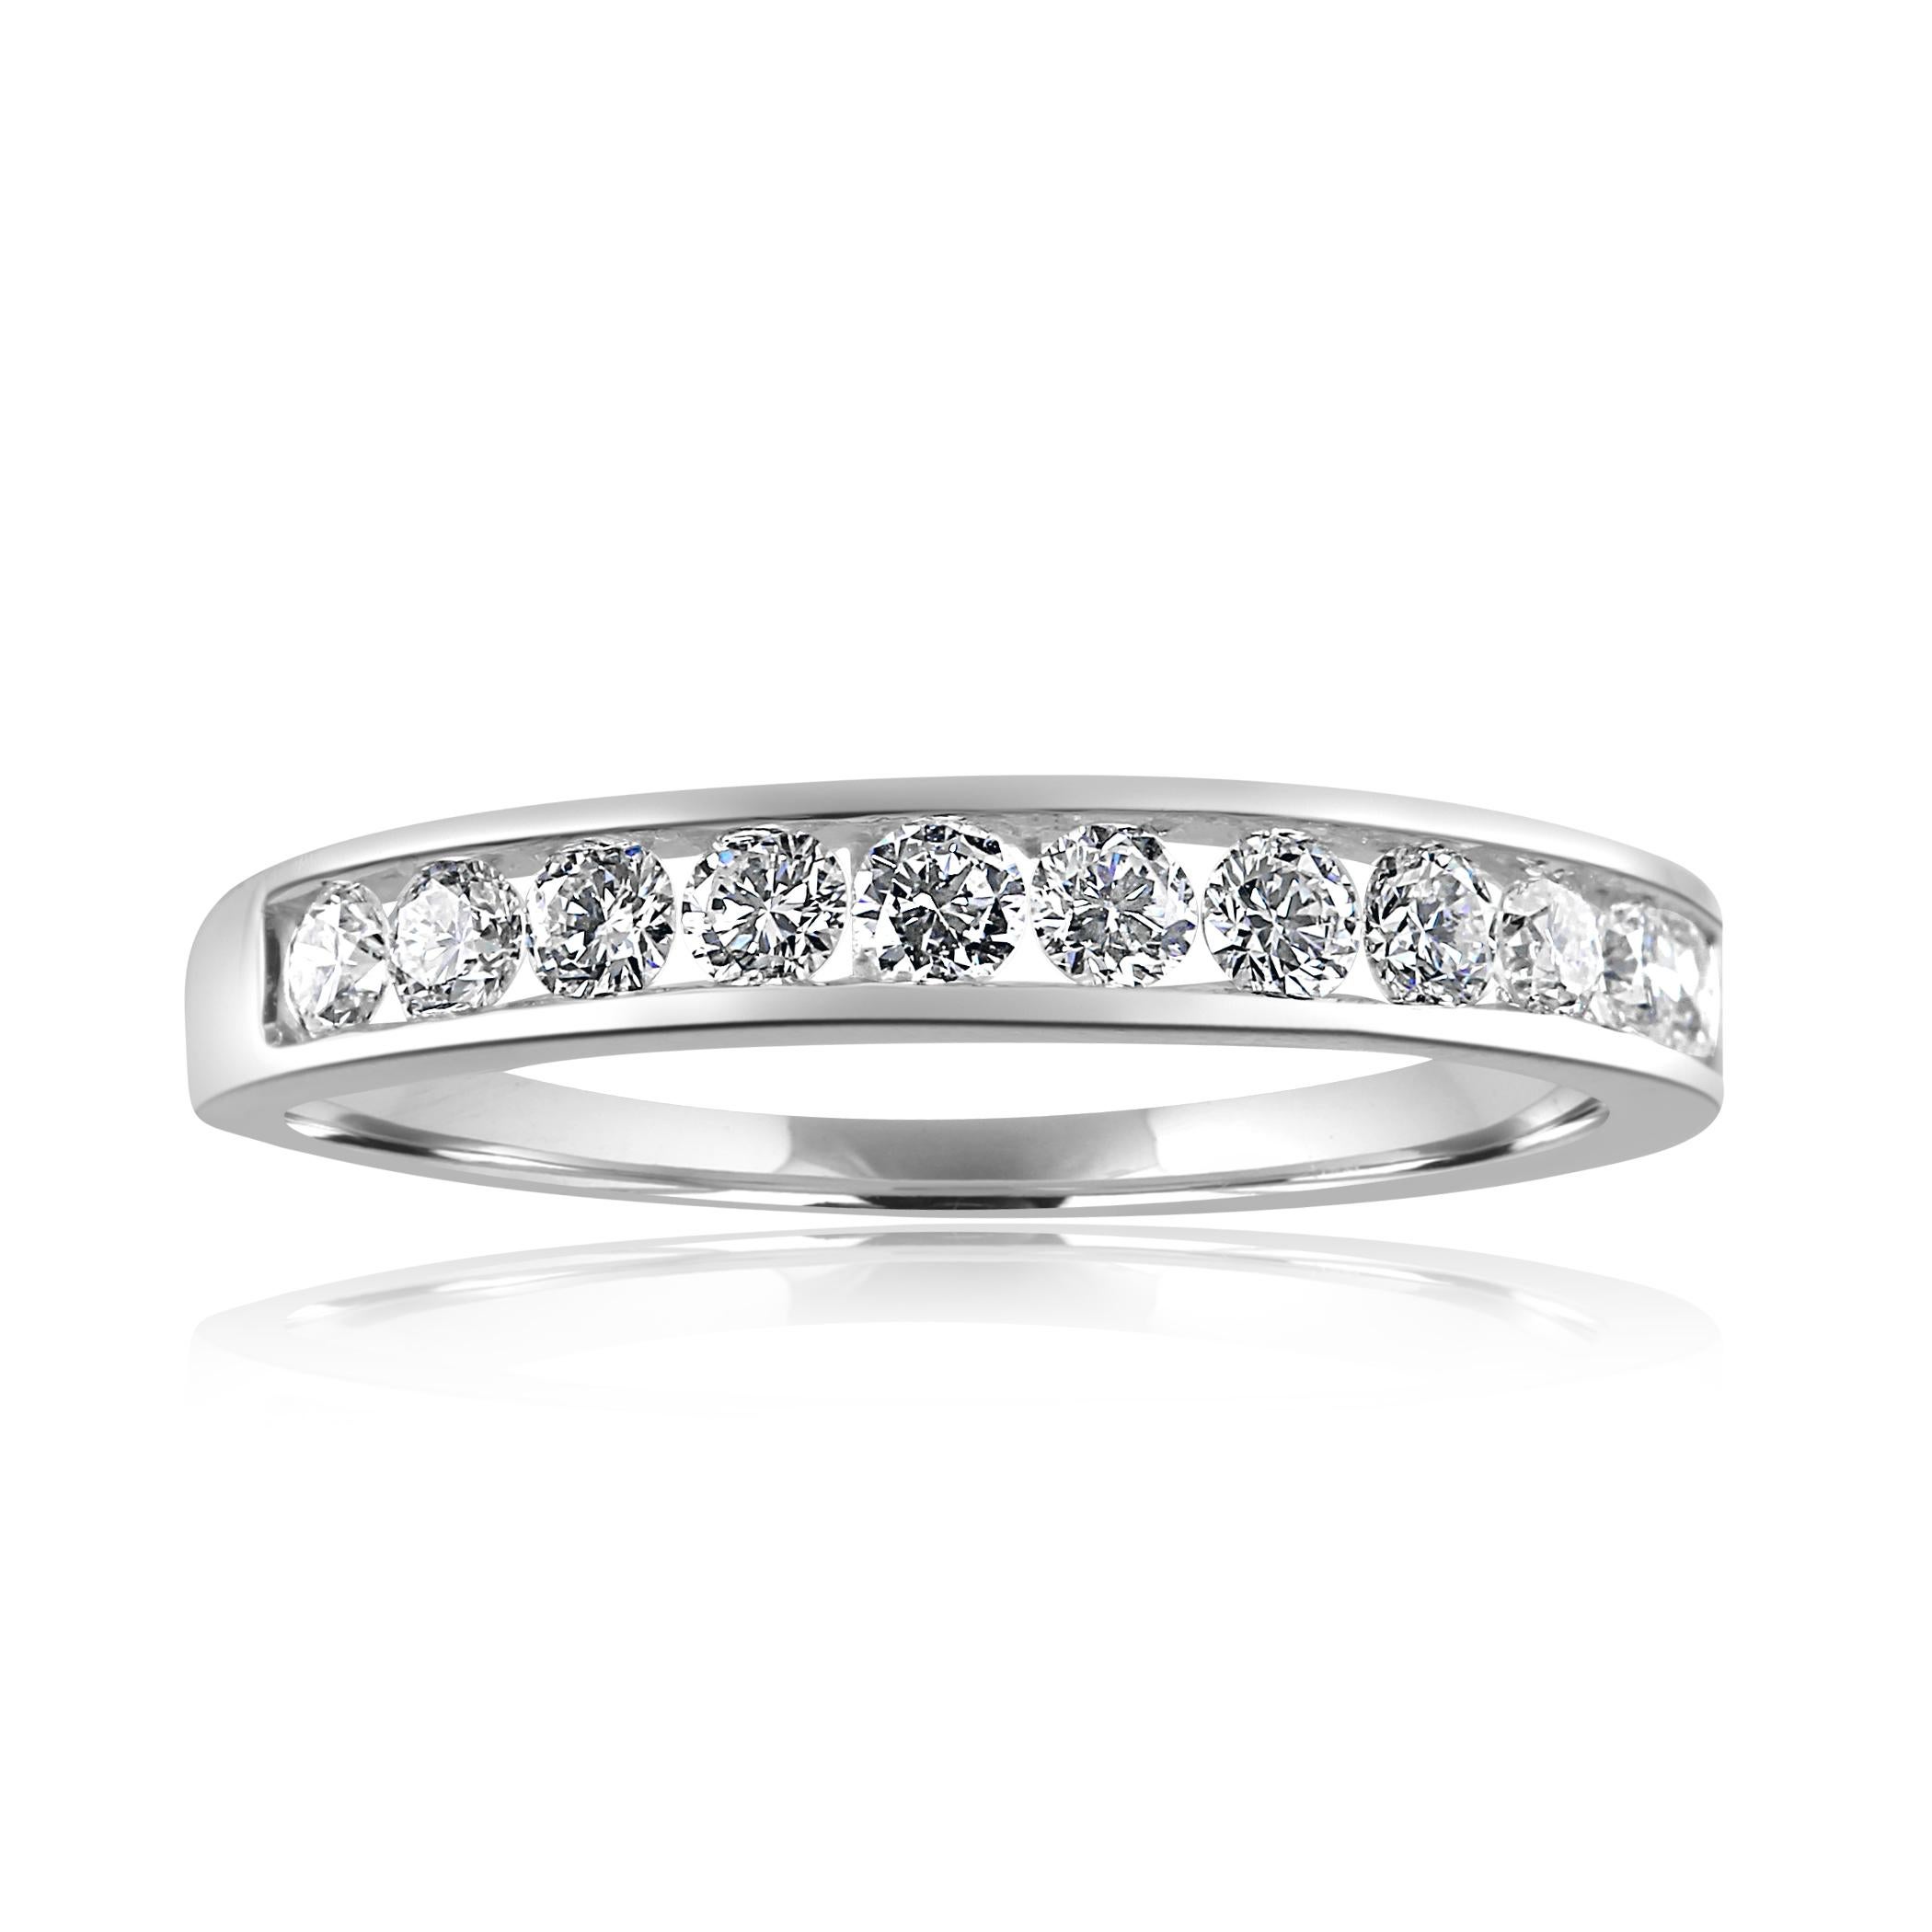 A True Classic 11 White Diamond Rounds GH Color VS-SI Clarity 0.50 Carat Channel set in 14k White gold Fashion Cocktail Band Ring.

Style available in different price ranges. Prices are based on your selection of 4C's Cut, Color, Carat, Clarity.